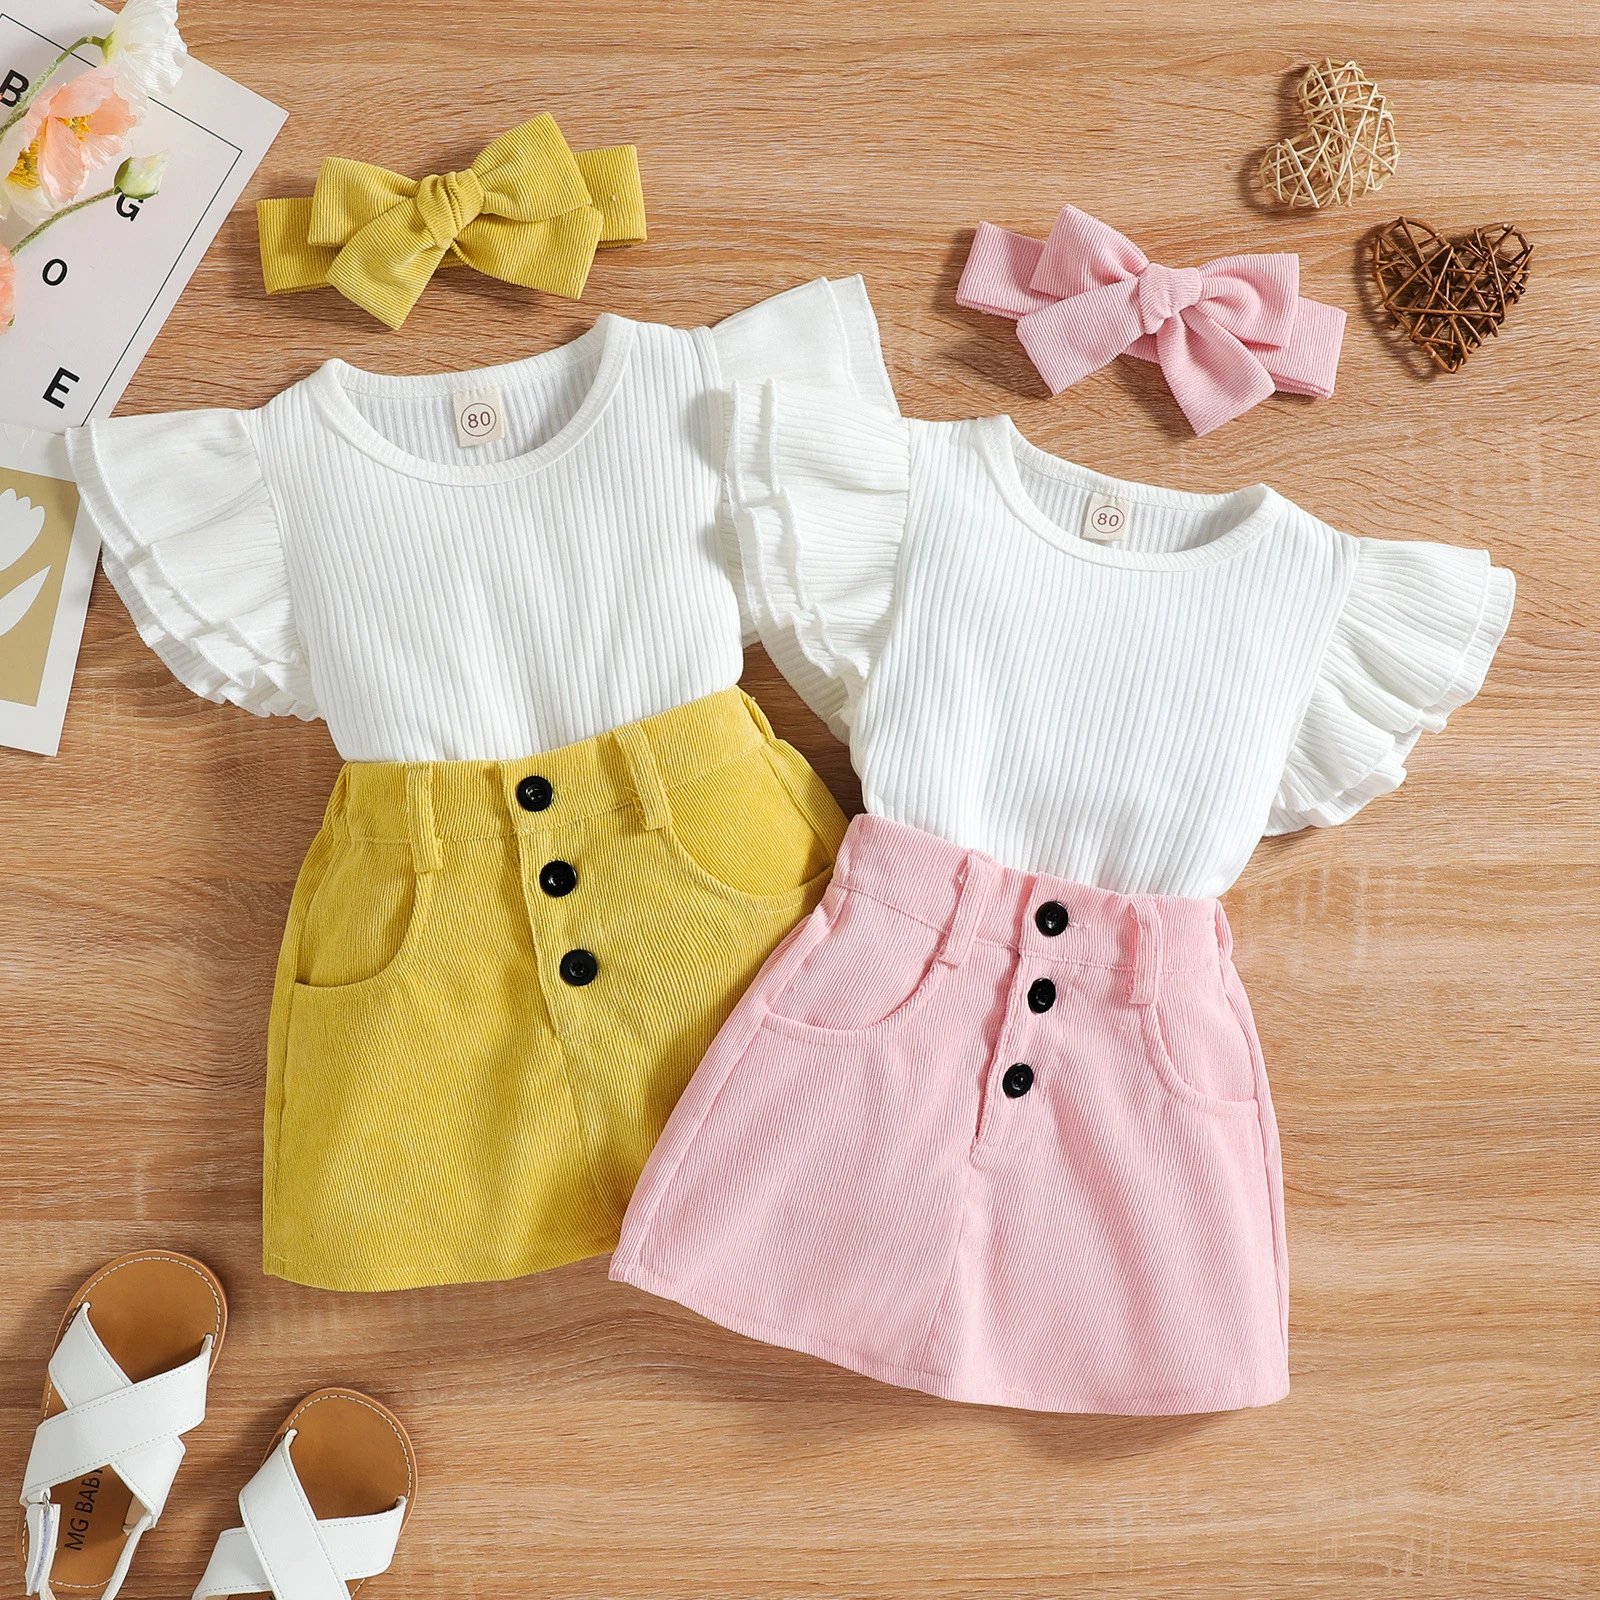 Baby Clothing Set for boy Baby Girl Clothes Children Casual Outfits Infant Solid Flying Sleeve T-shirt + Skirt 2pcs Set Toddler Summer Cute Clothing Sets newborn baby clothing gift set